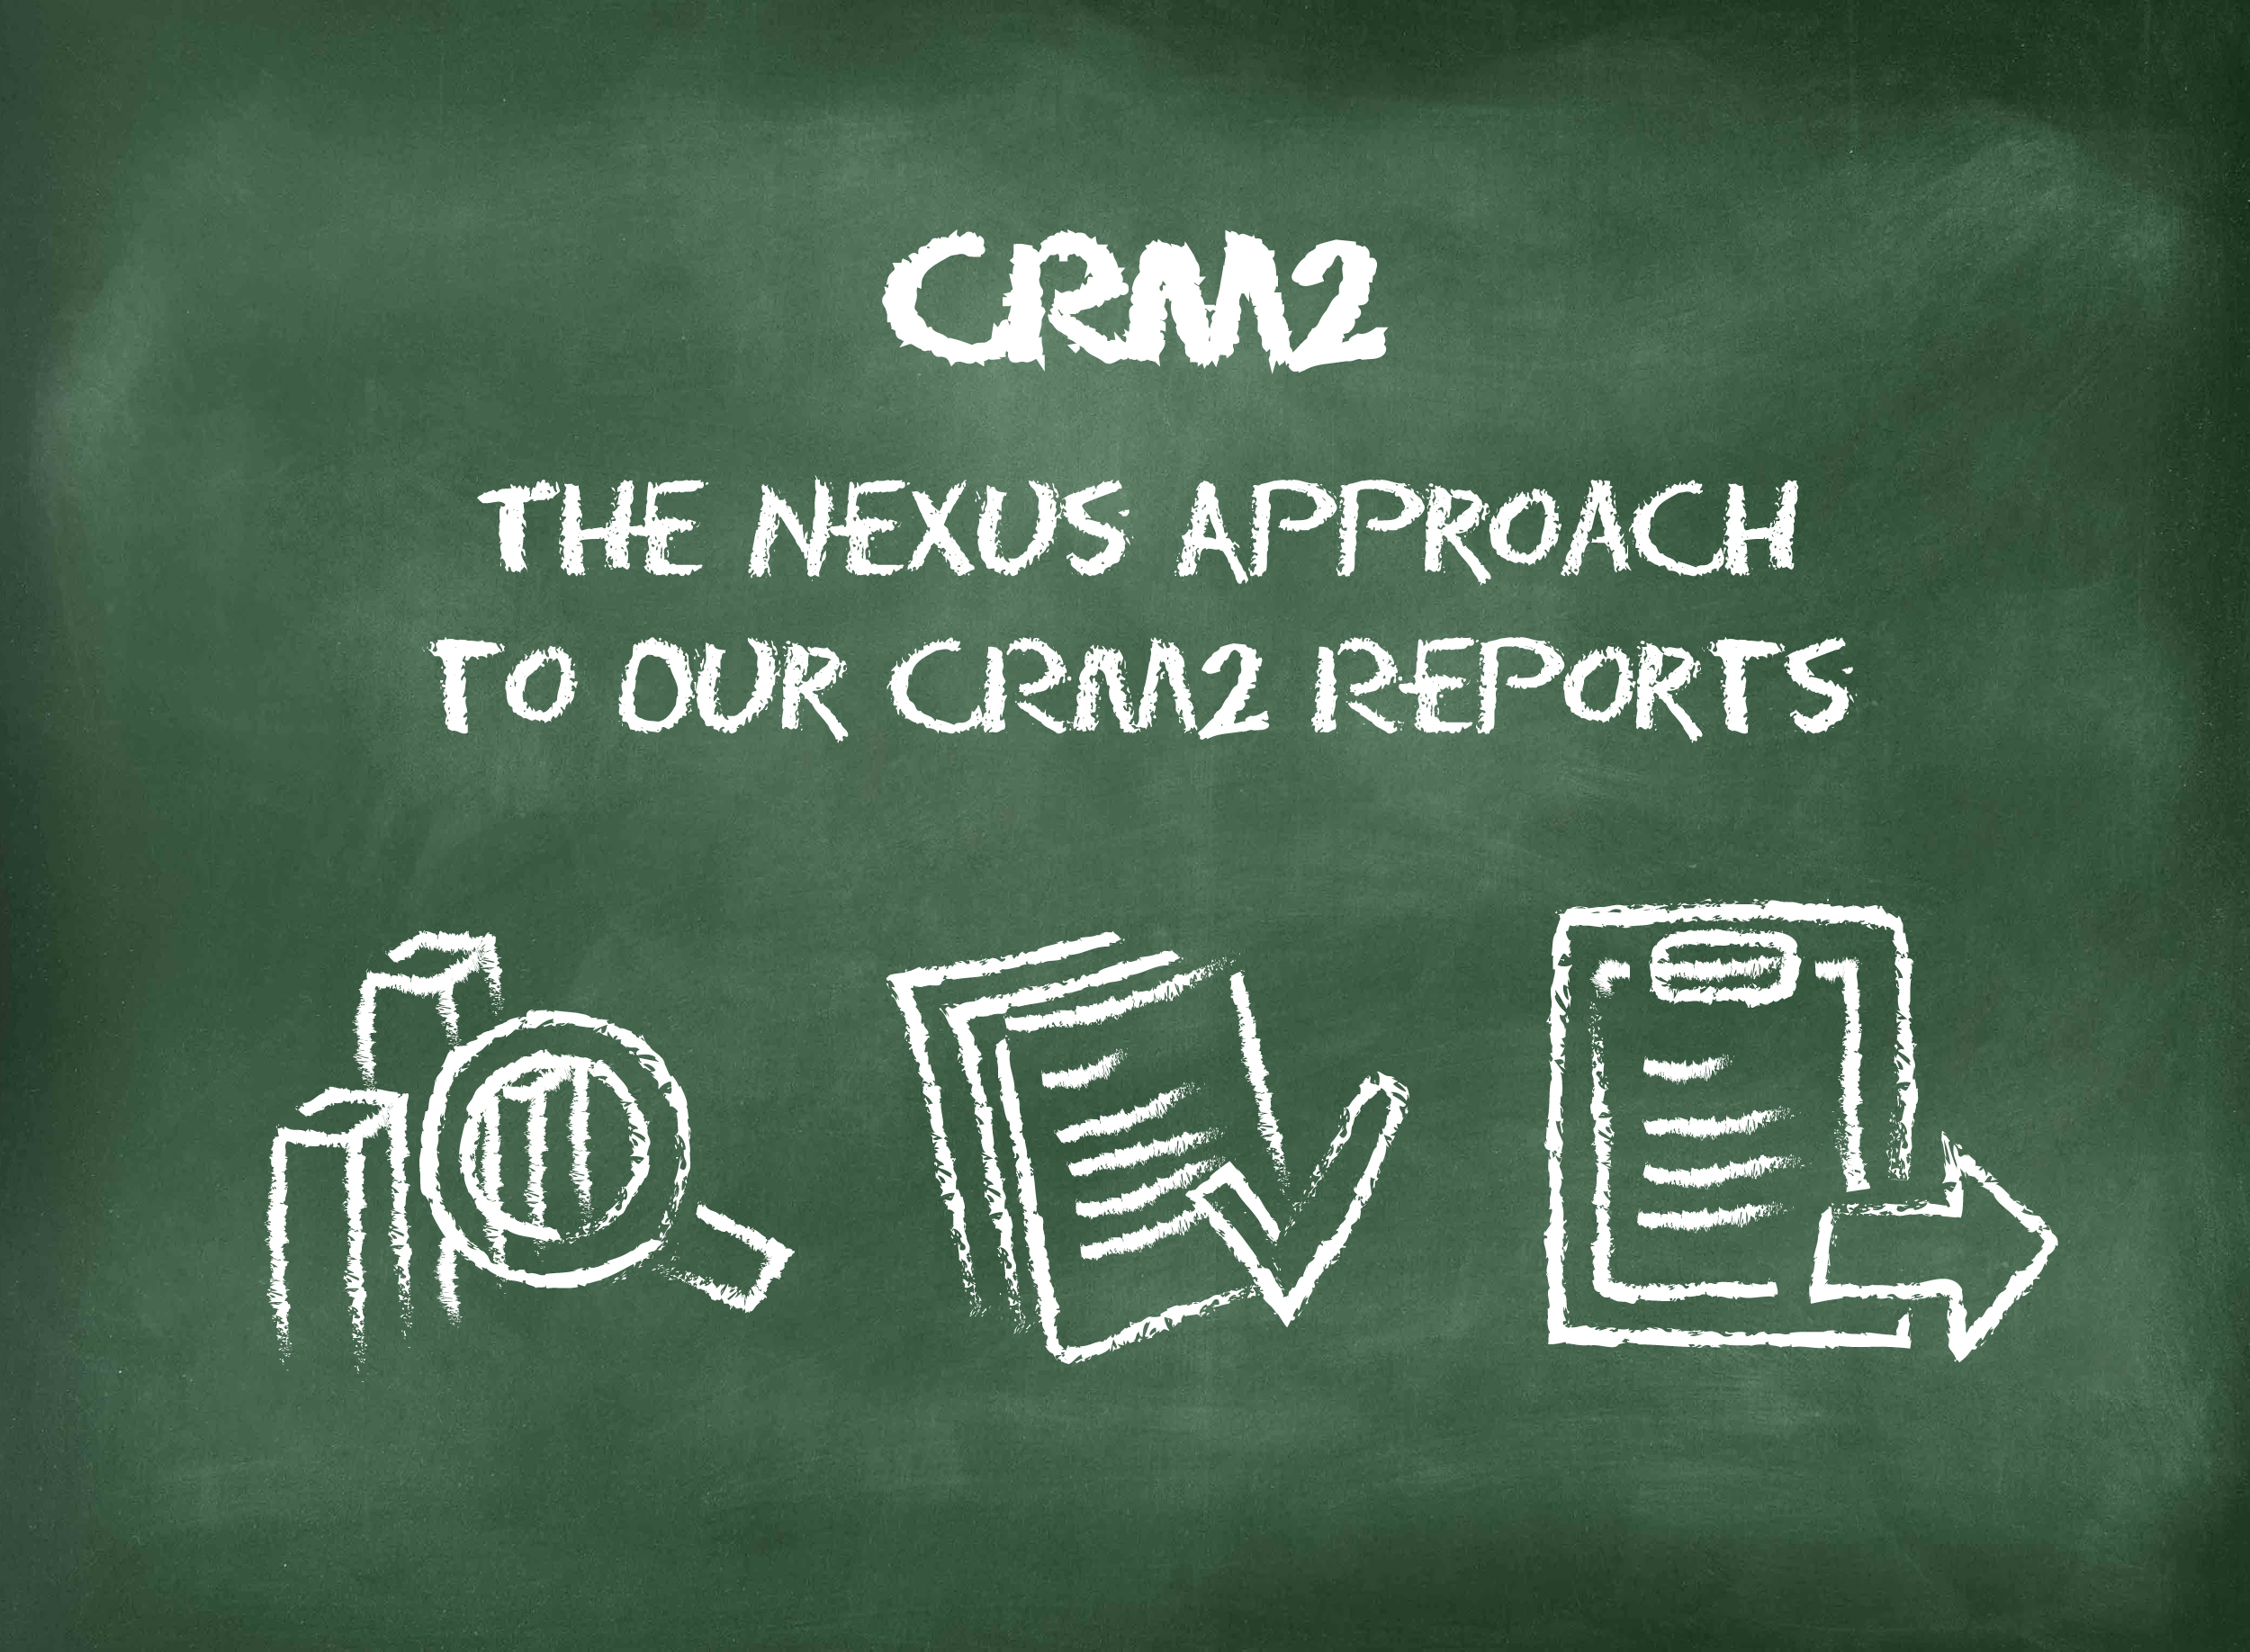 CRM2: The Nexus Approach to our CRM2 Reports